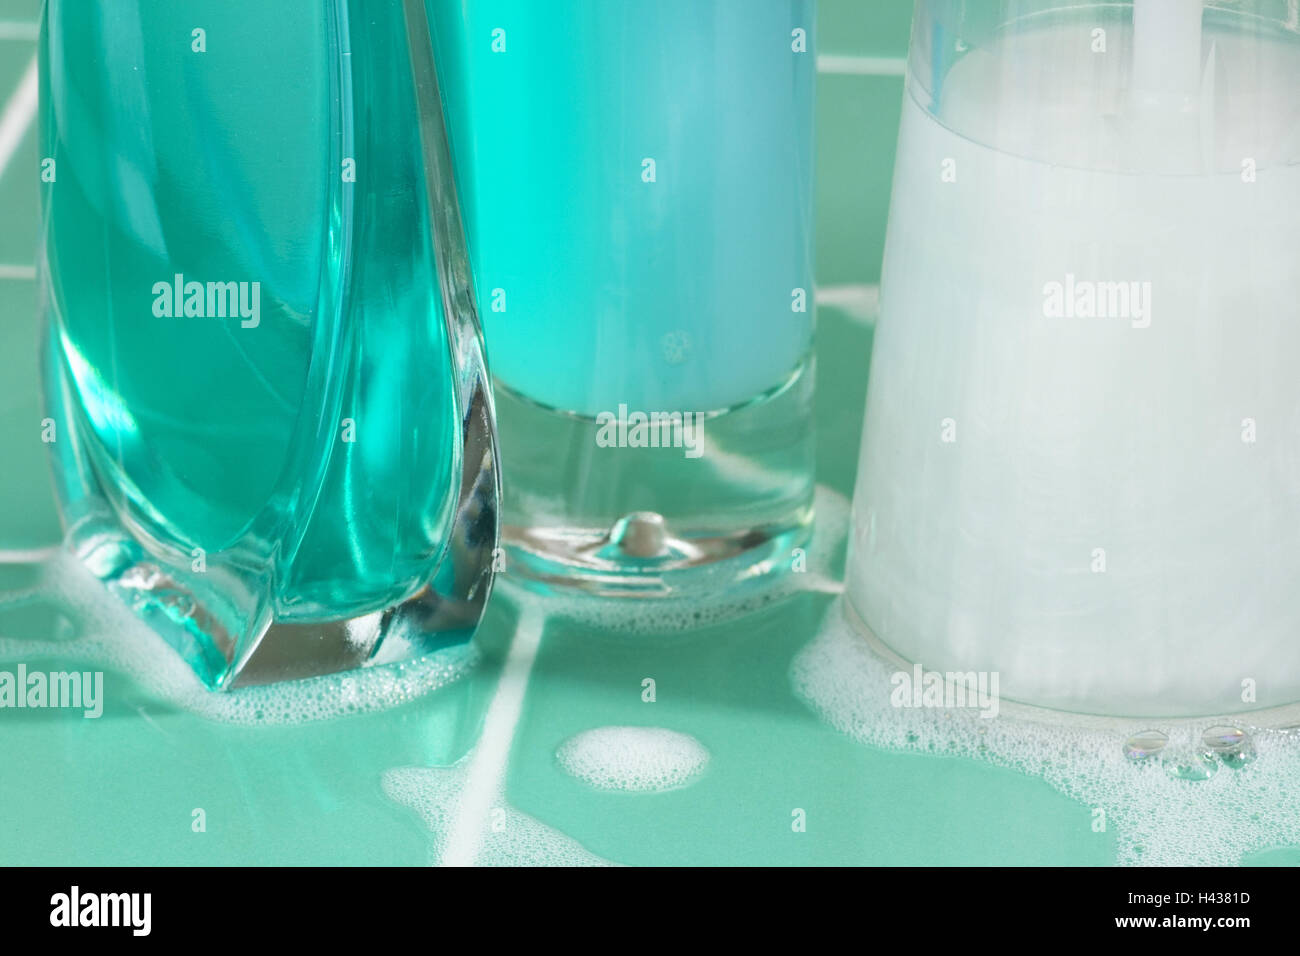 soap dispenser, glass decanters, bath additions, detail, Stock Photo